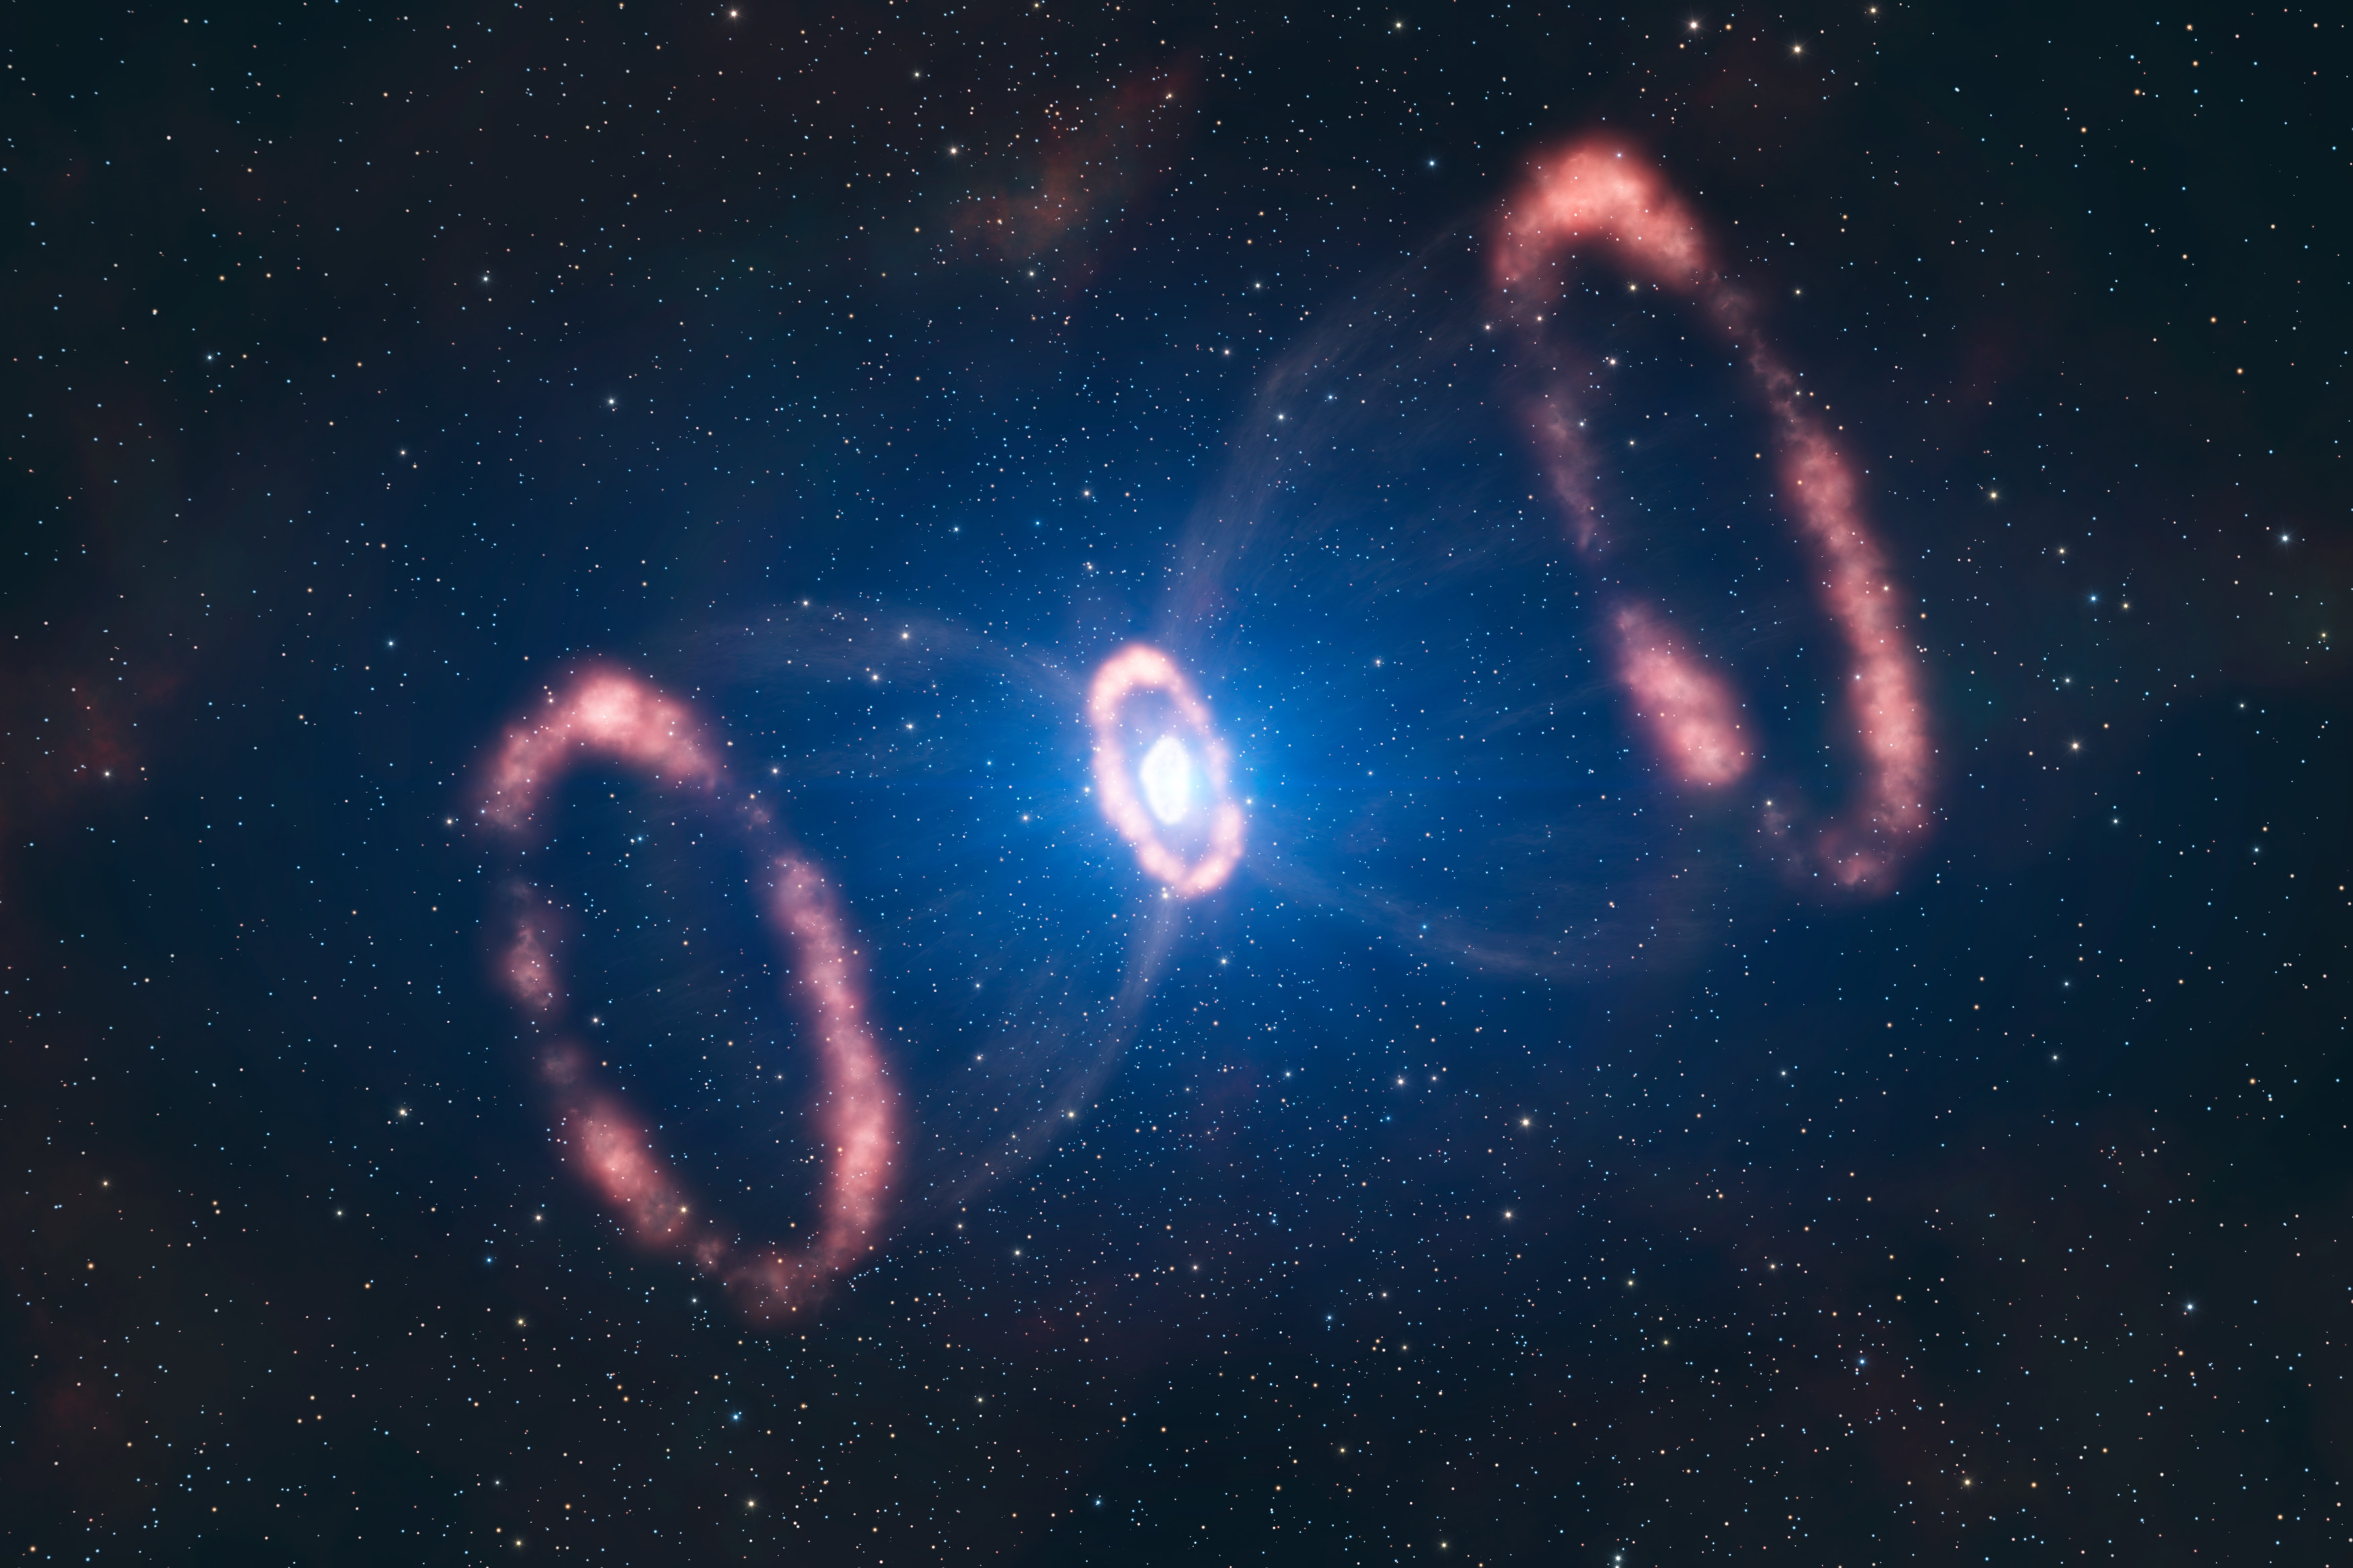 Sn 1987a remnant